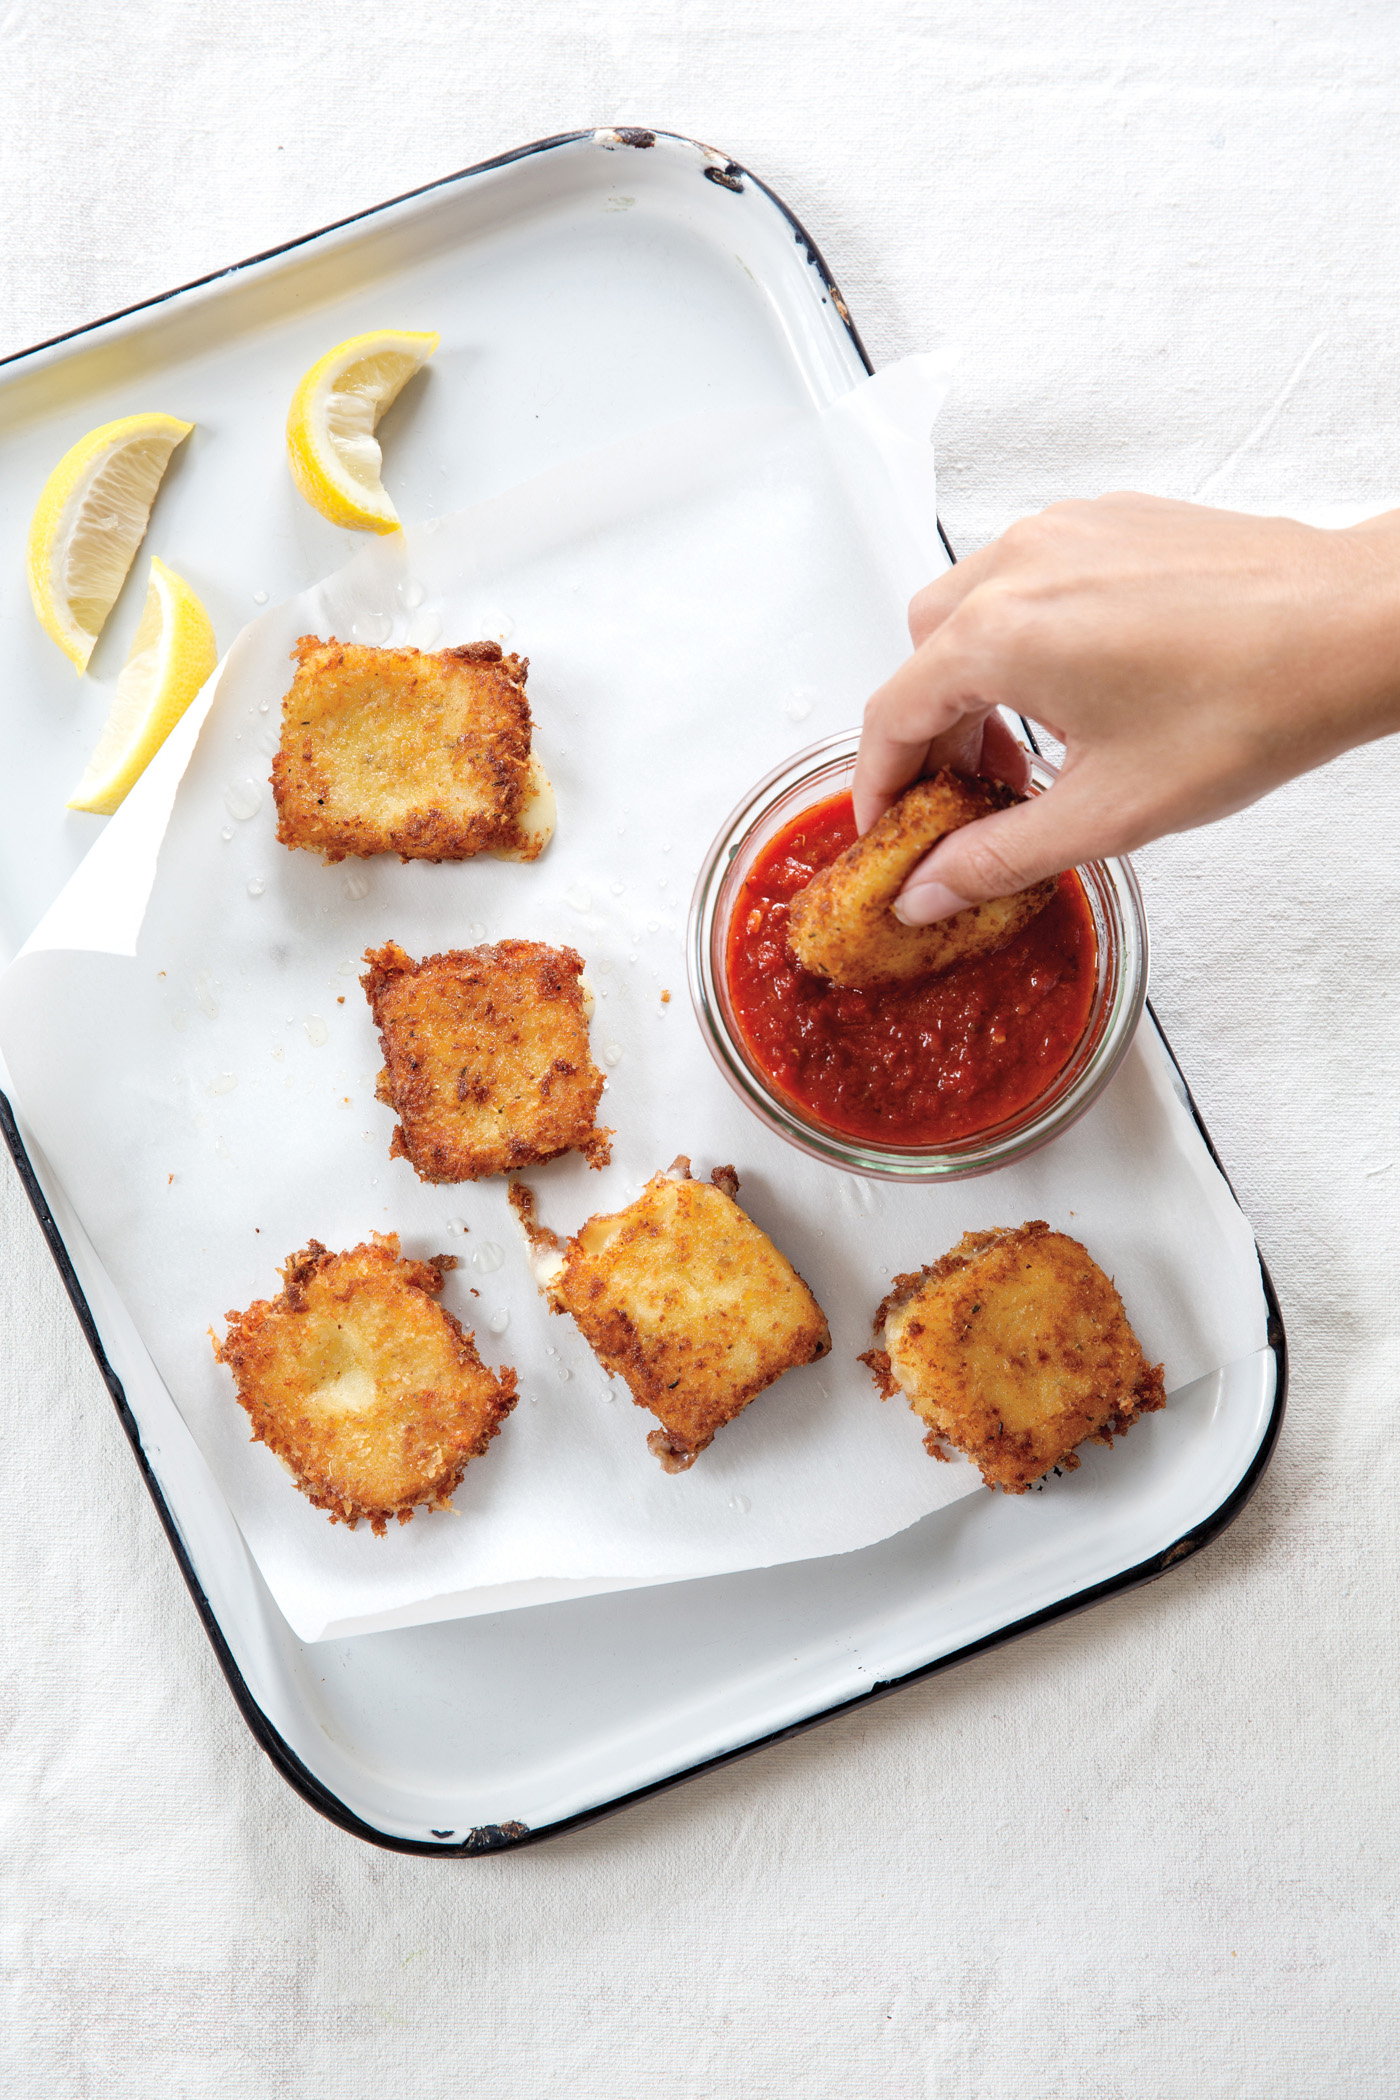 The Dinner Plan cookbook: One of our new must-have cookbooks for families thanks to smart tips and excellent recipes the whole family will love like these Melted Mozzarella Squares! | Cool Mom Eats (Photo by Maura McEvoy for The Dinner Plan)